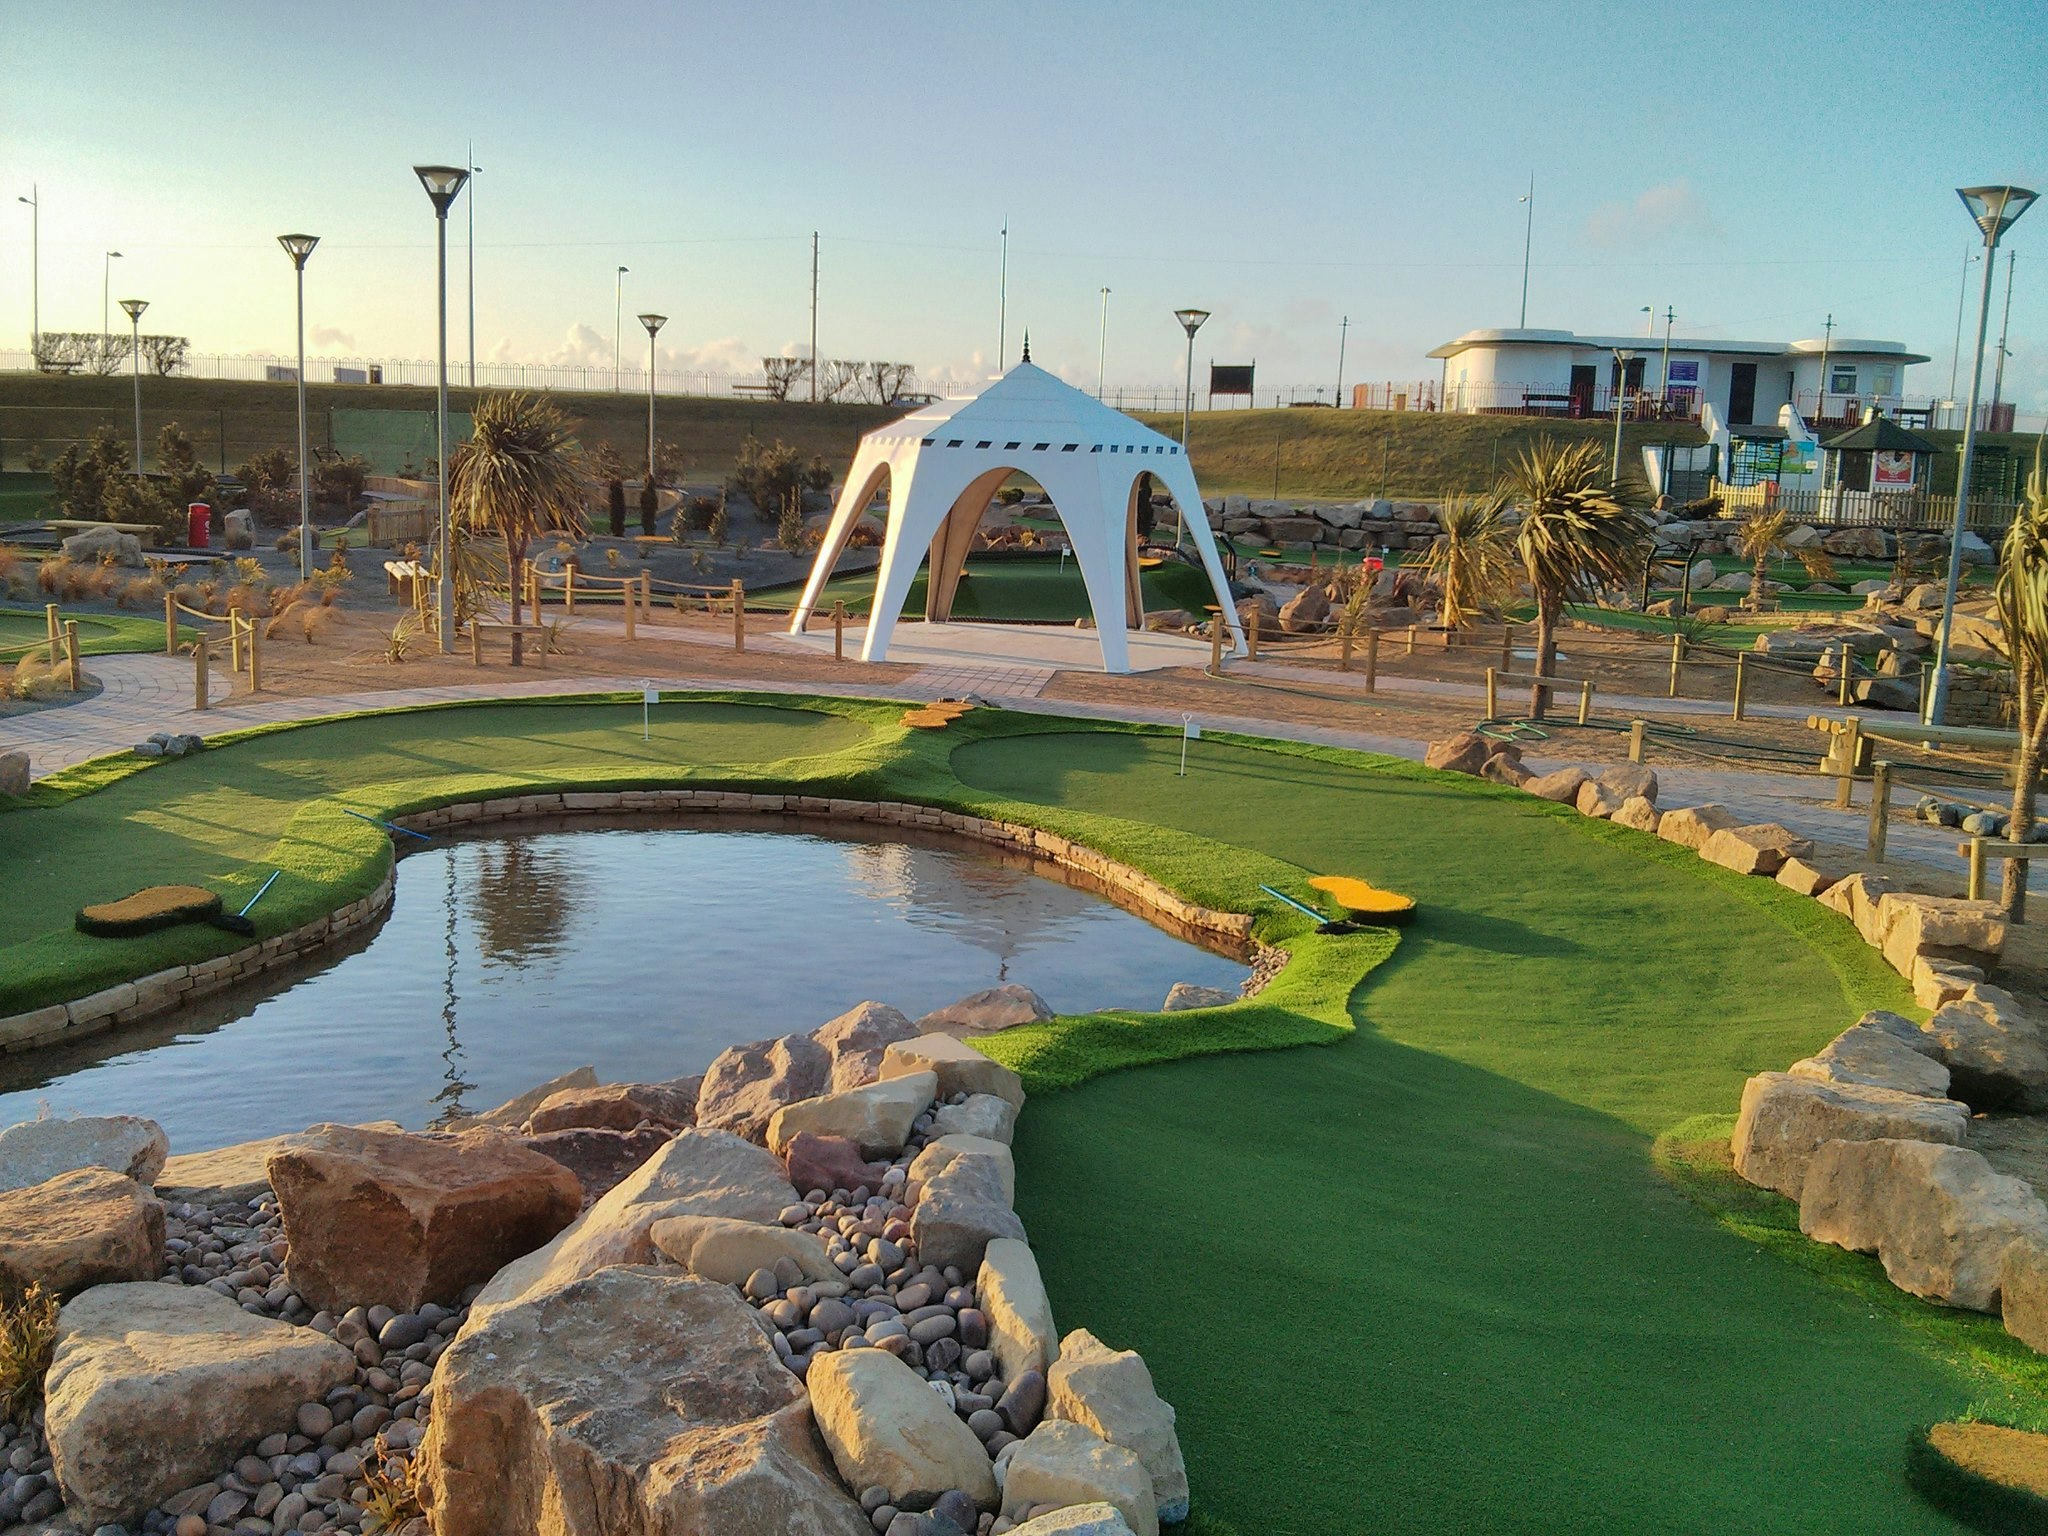 A body of water is in the middle of a green at Championship Adventure Golf, in England. An awning is visible at the center of the image.